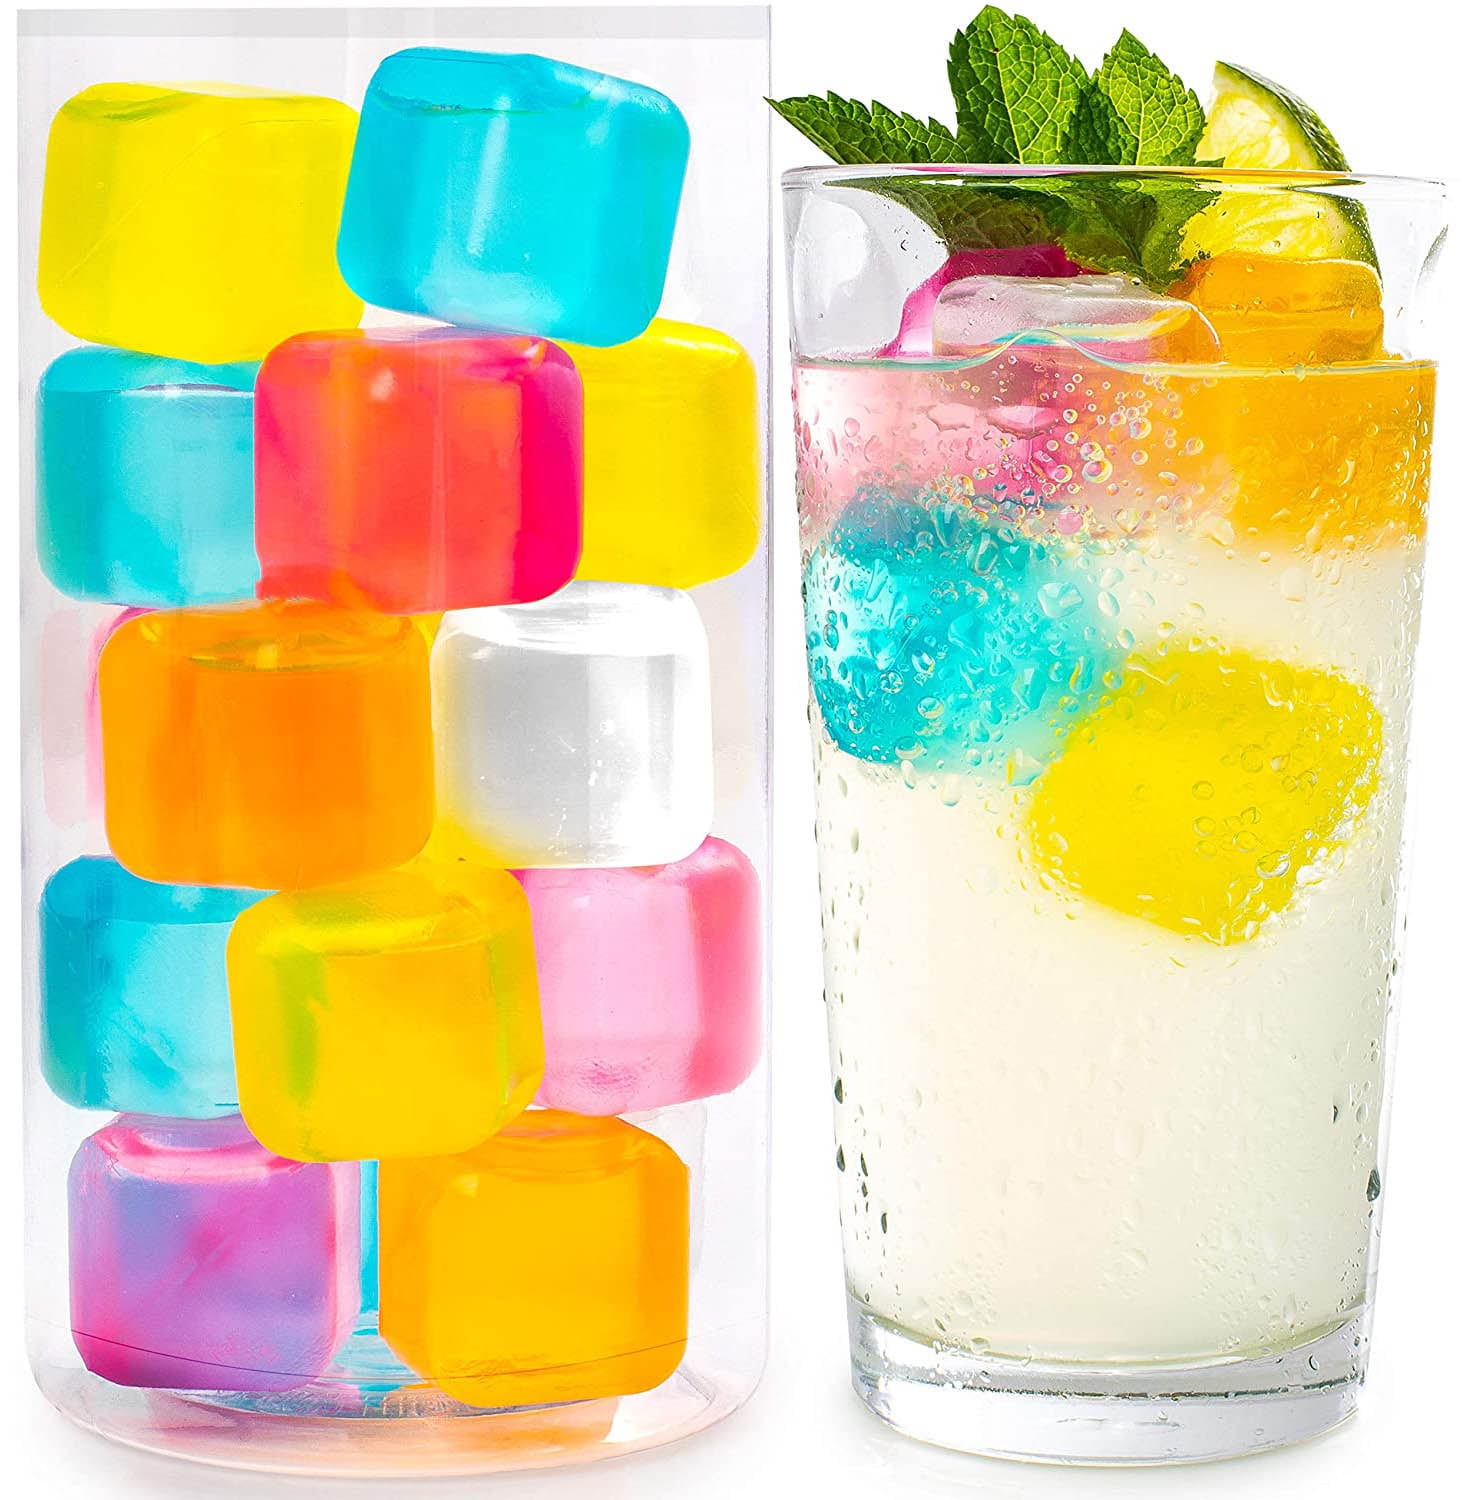 Uncorked Drink Essentials Chill Ice Reusable Ice Cubes, 12 count